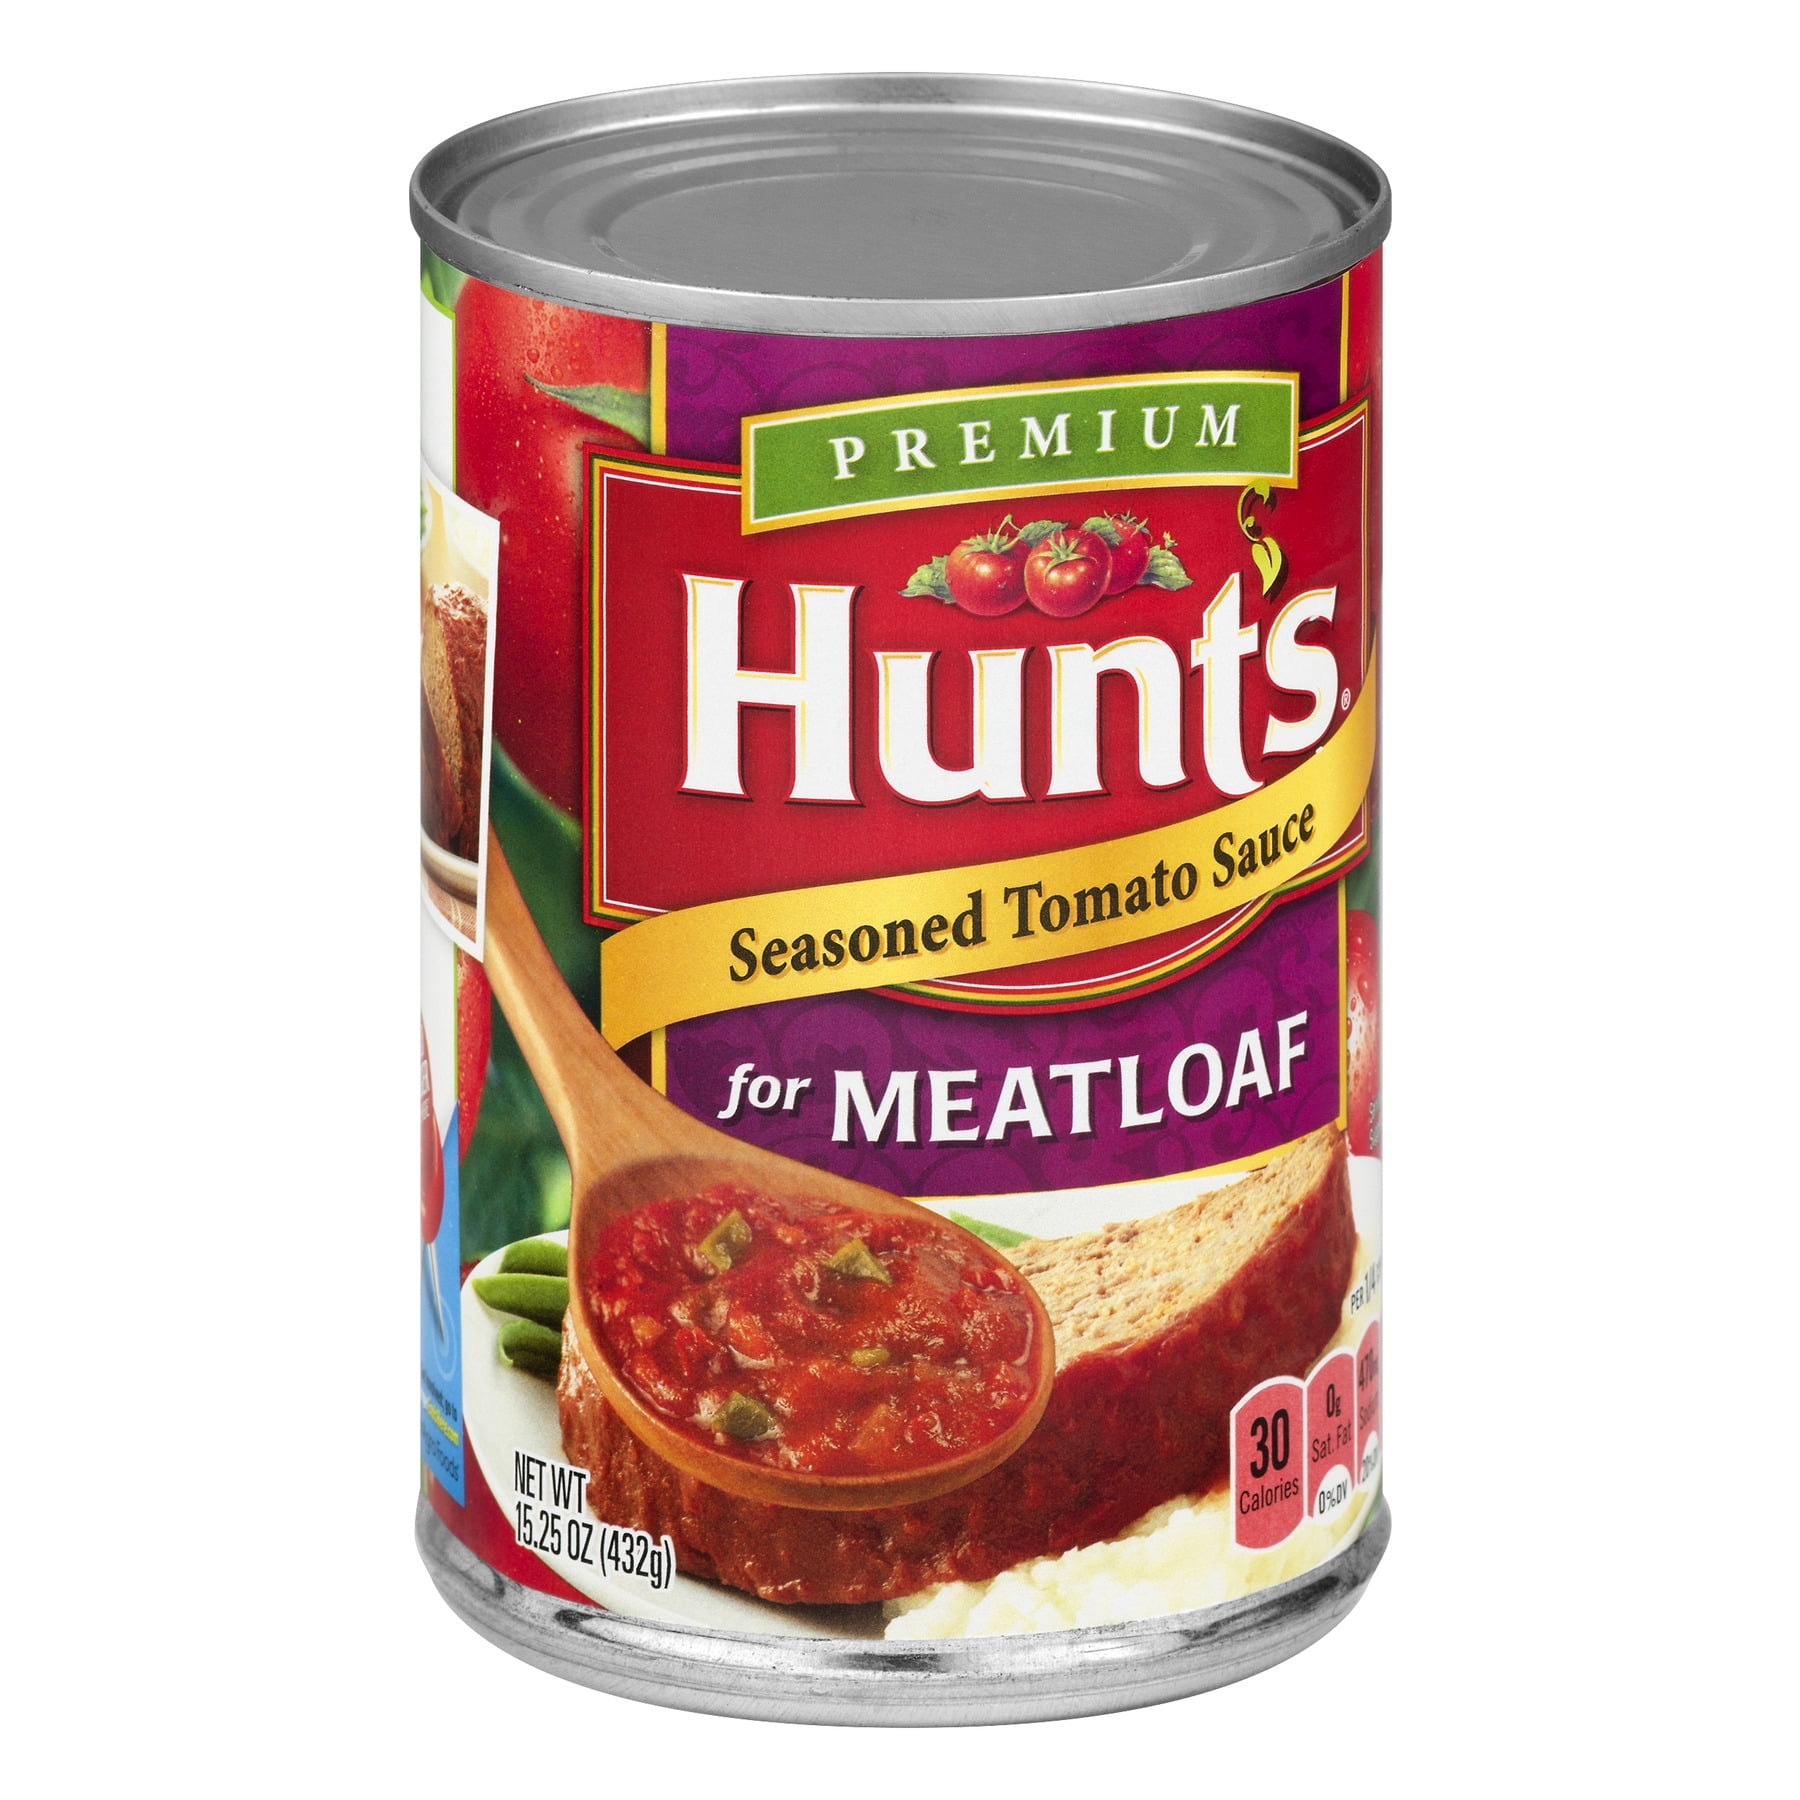 Sauce For Meatloaf With Tomato Paste / Hunt's Seasoned Diced Tomatoes